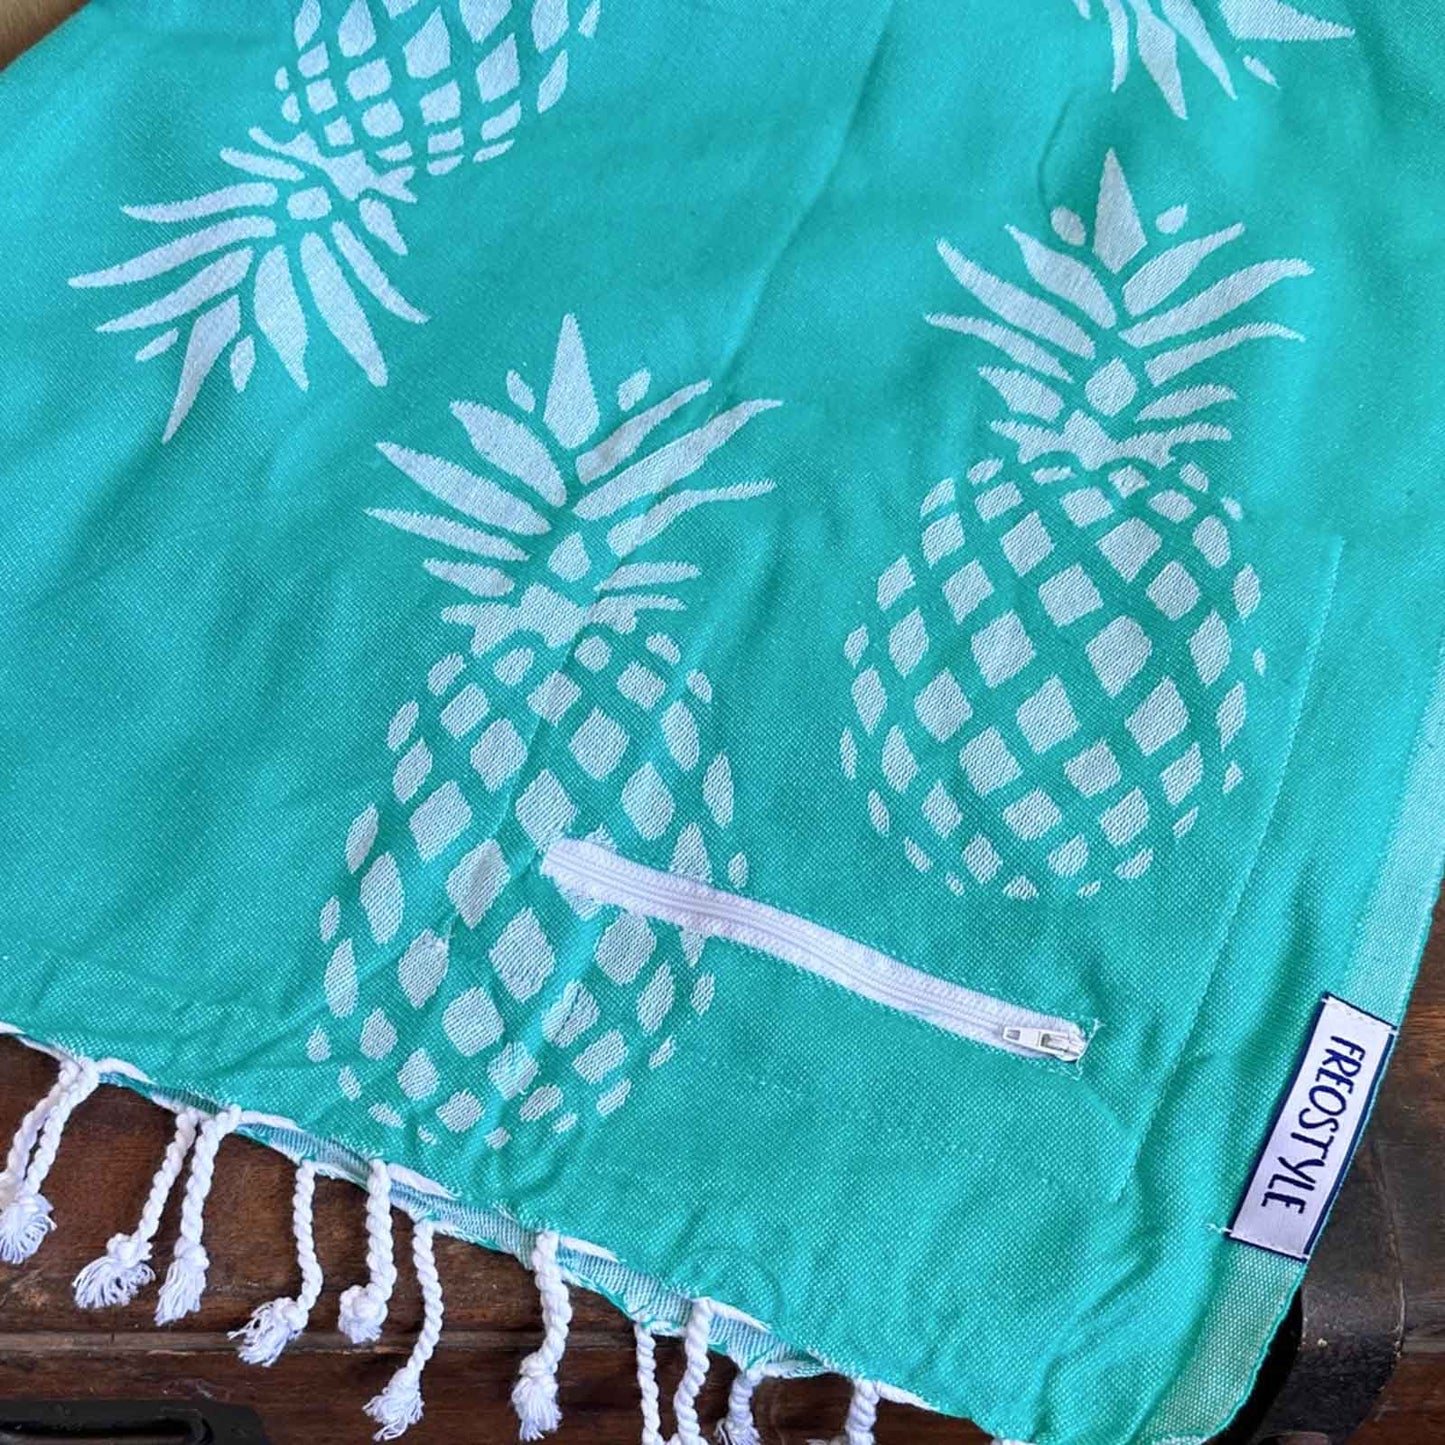 Pineapple Mint Turkish Towel with Pockets by Freostyle, folded